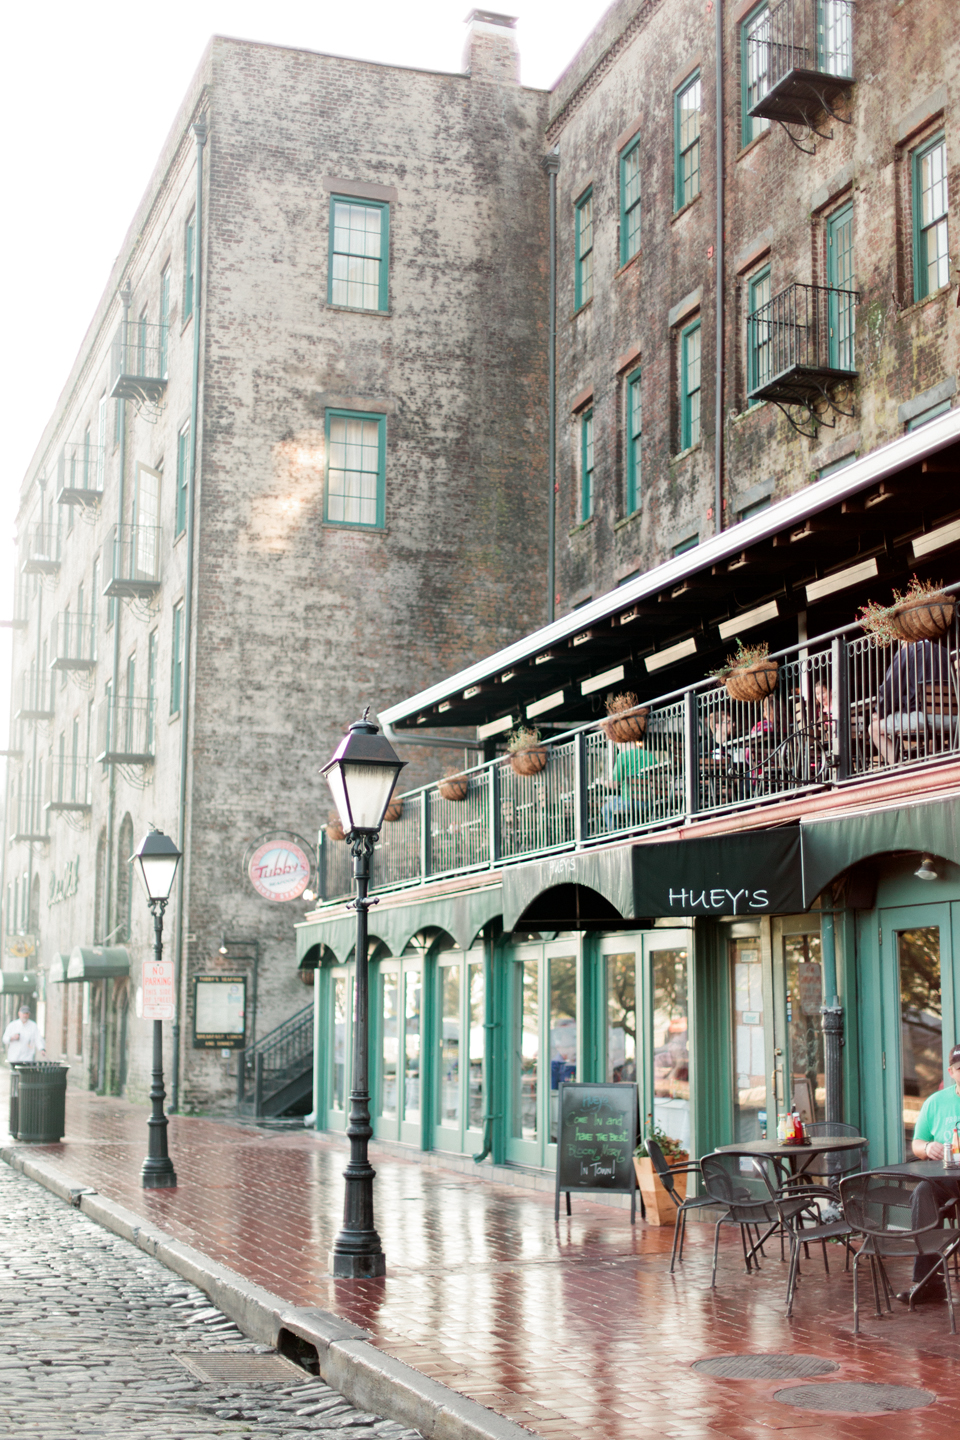 Image of East River Street in historic downtown Savannah.  There is a cobblestone street with a sidewalk cafe and lamp posts. 